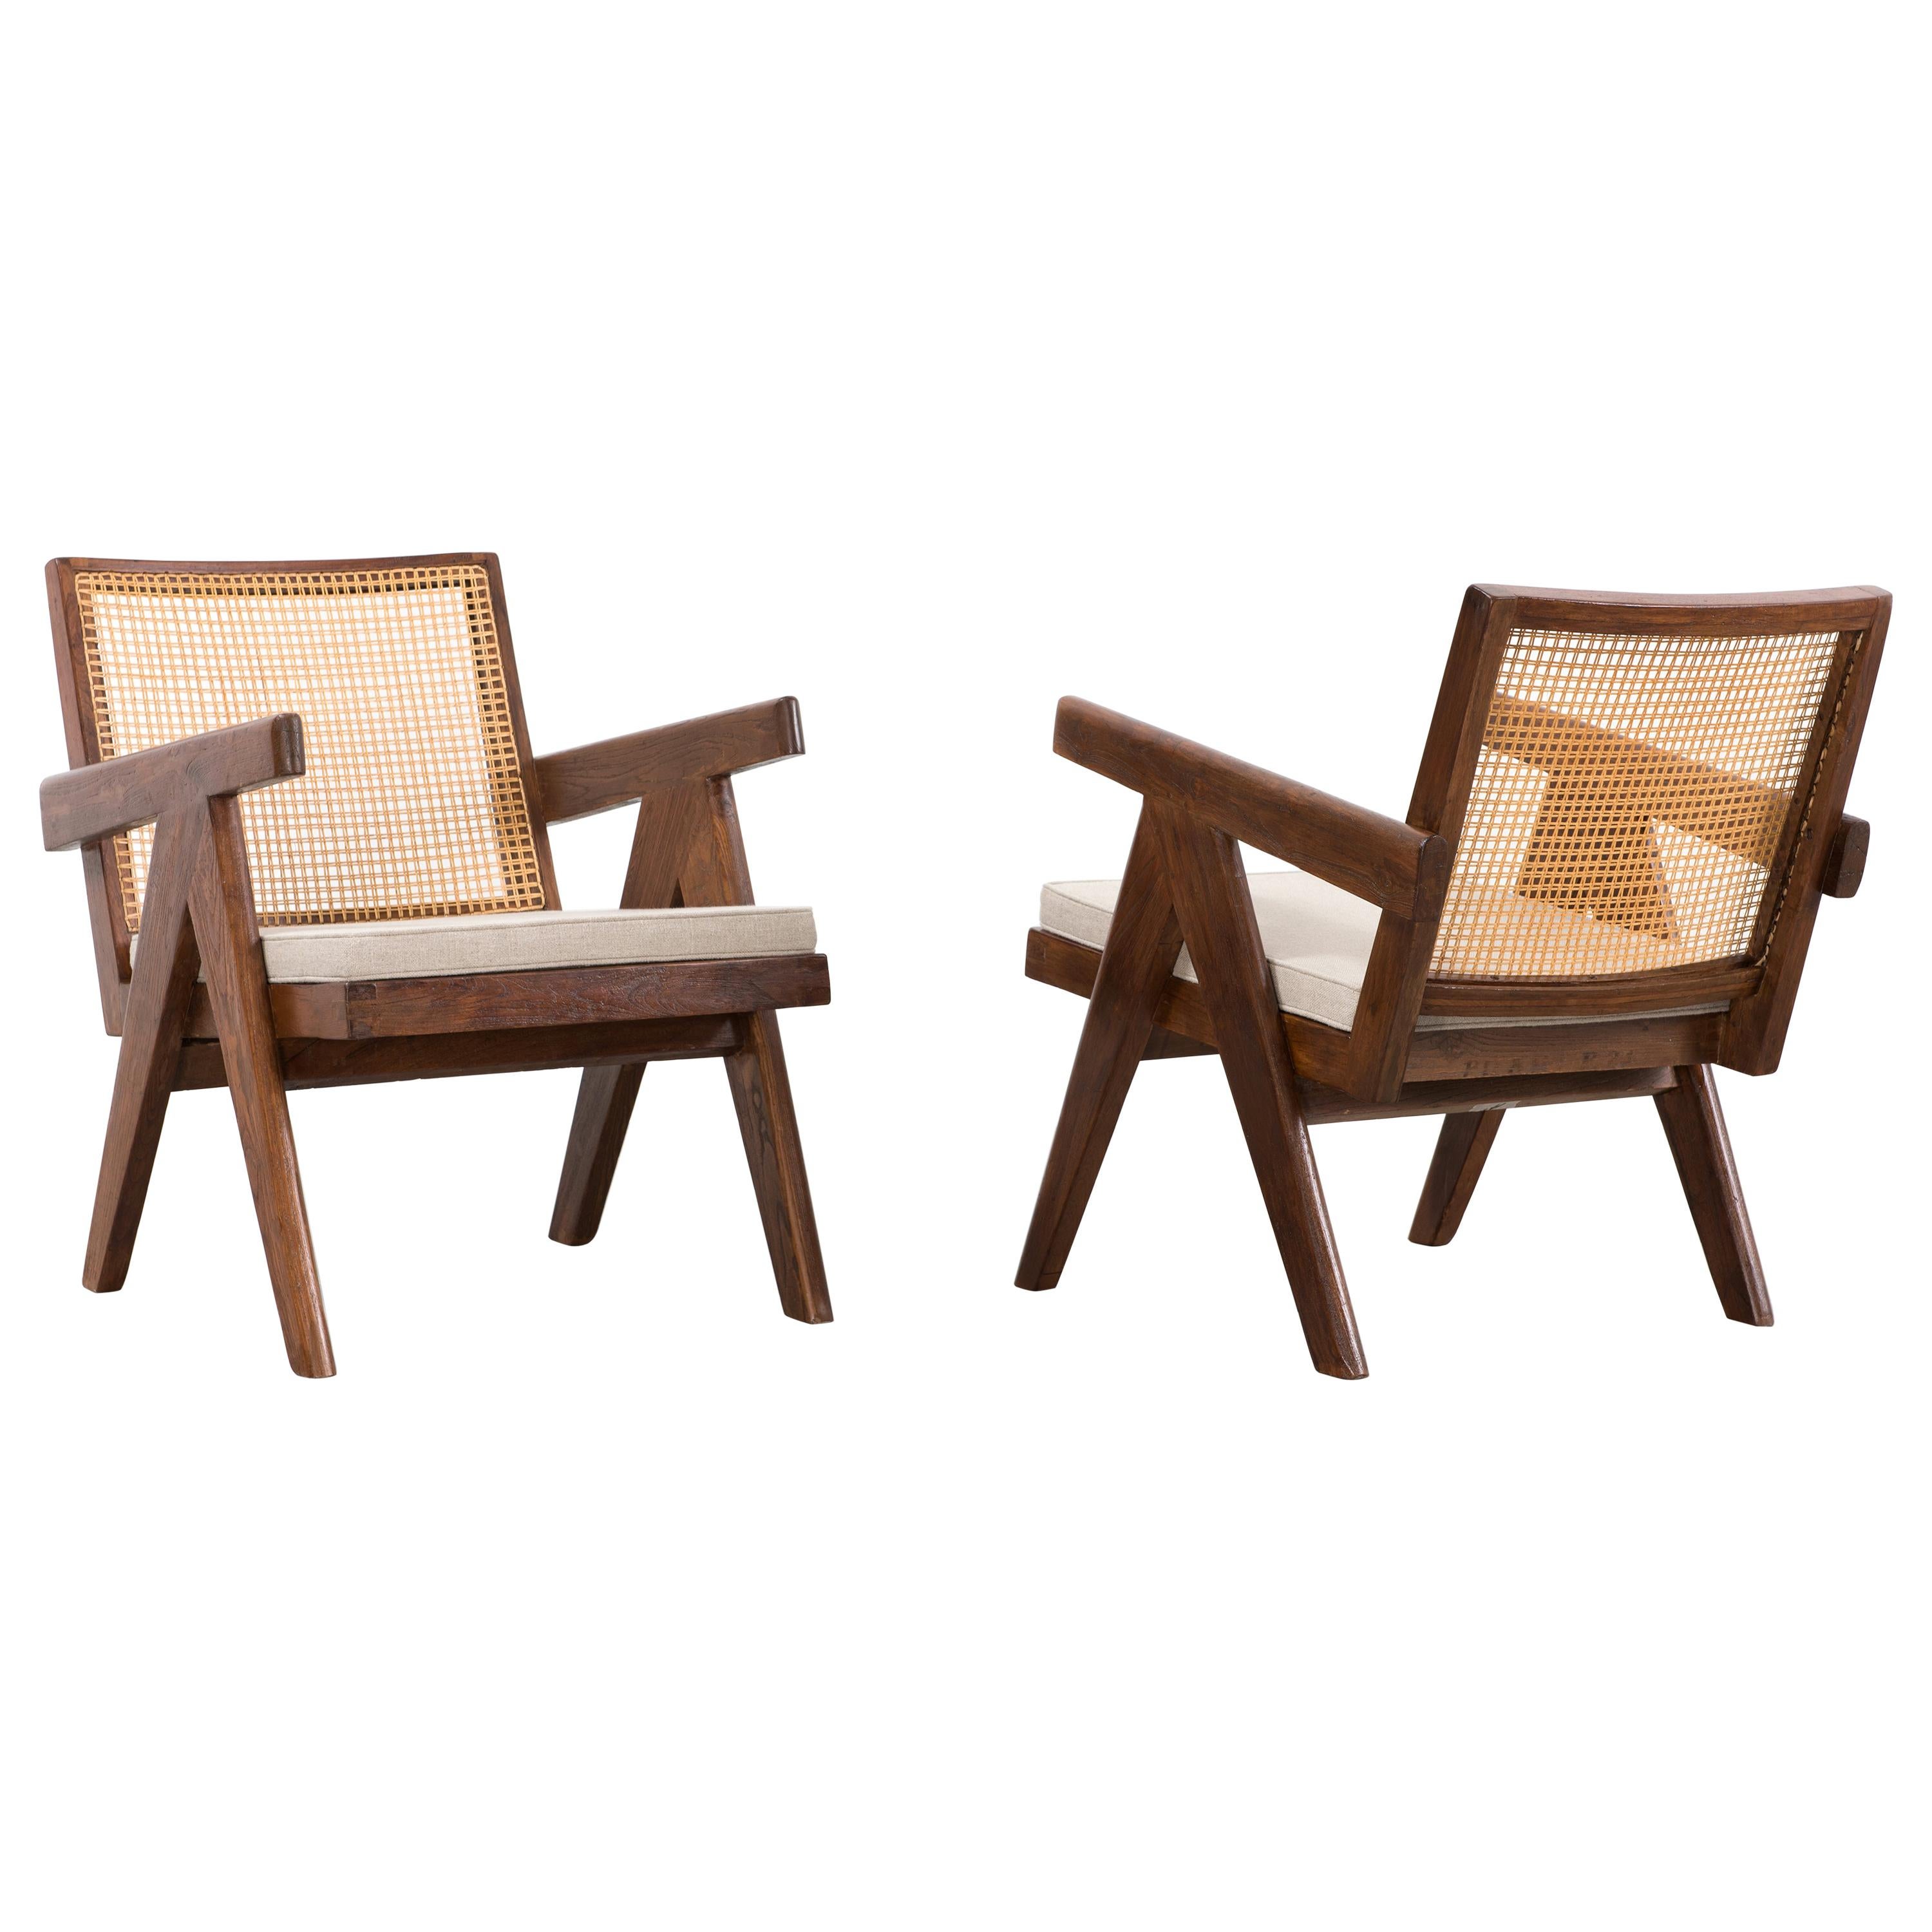 Pierre Jeanneret, Pair of Easy Armchairs, circa 1955-1956